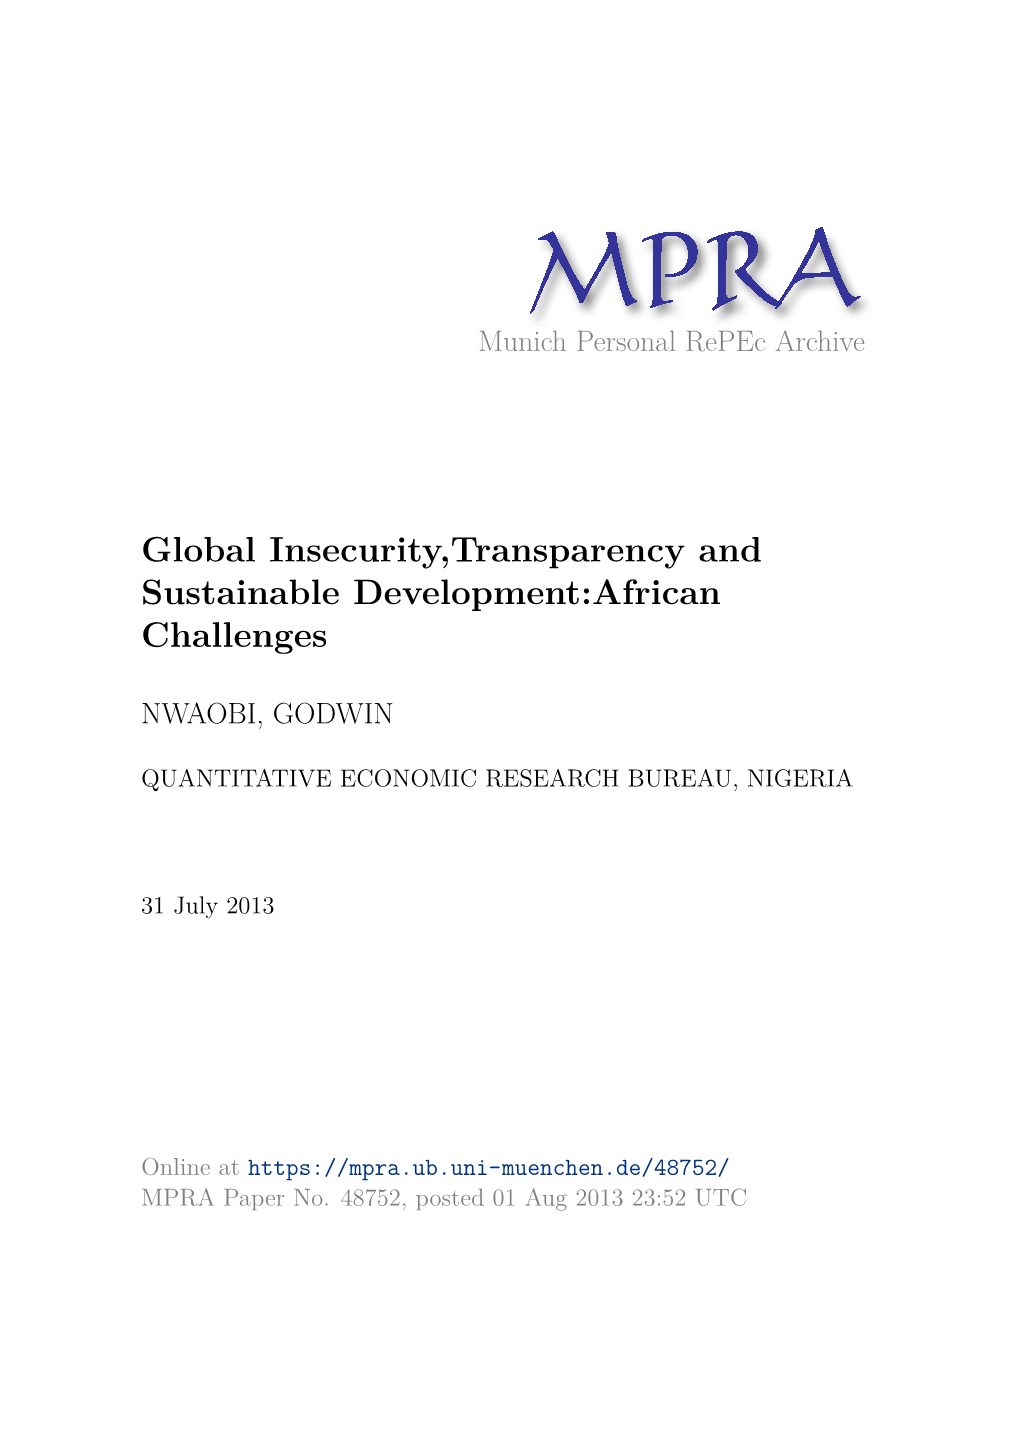 Global Insecurity,Transparency and Sustainable Development:African Challenges